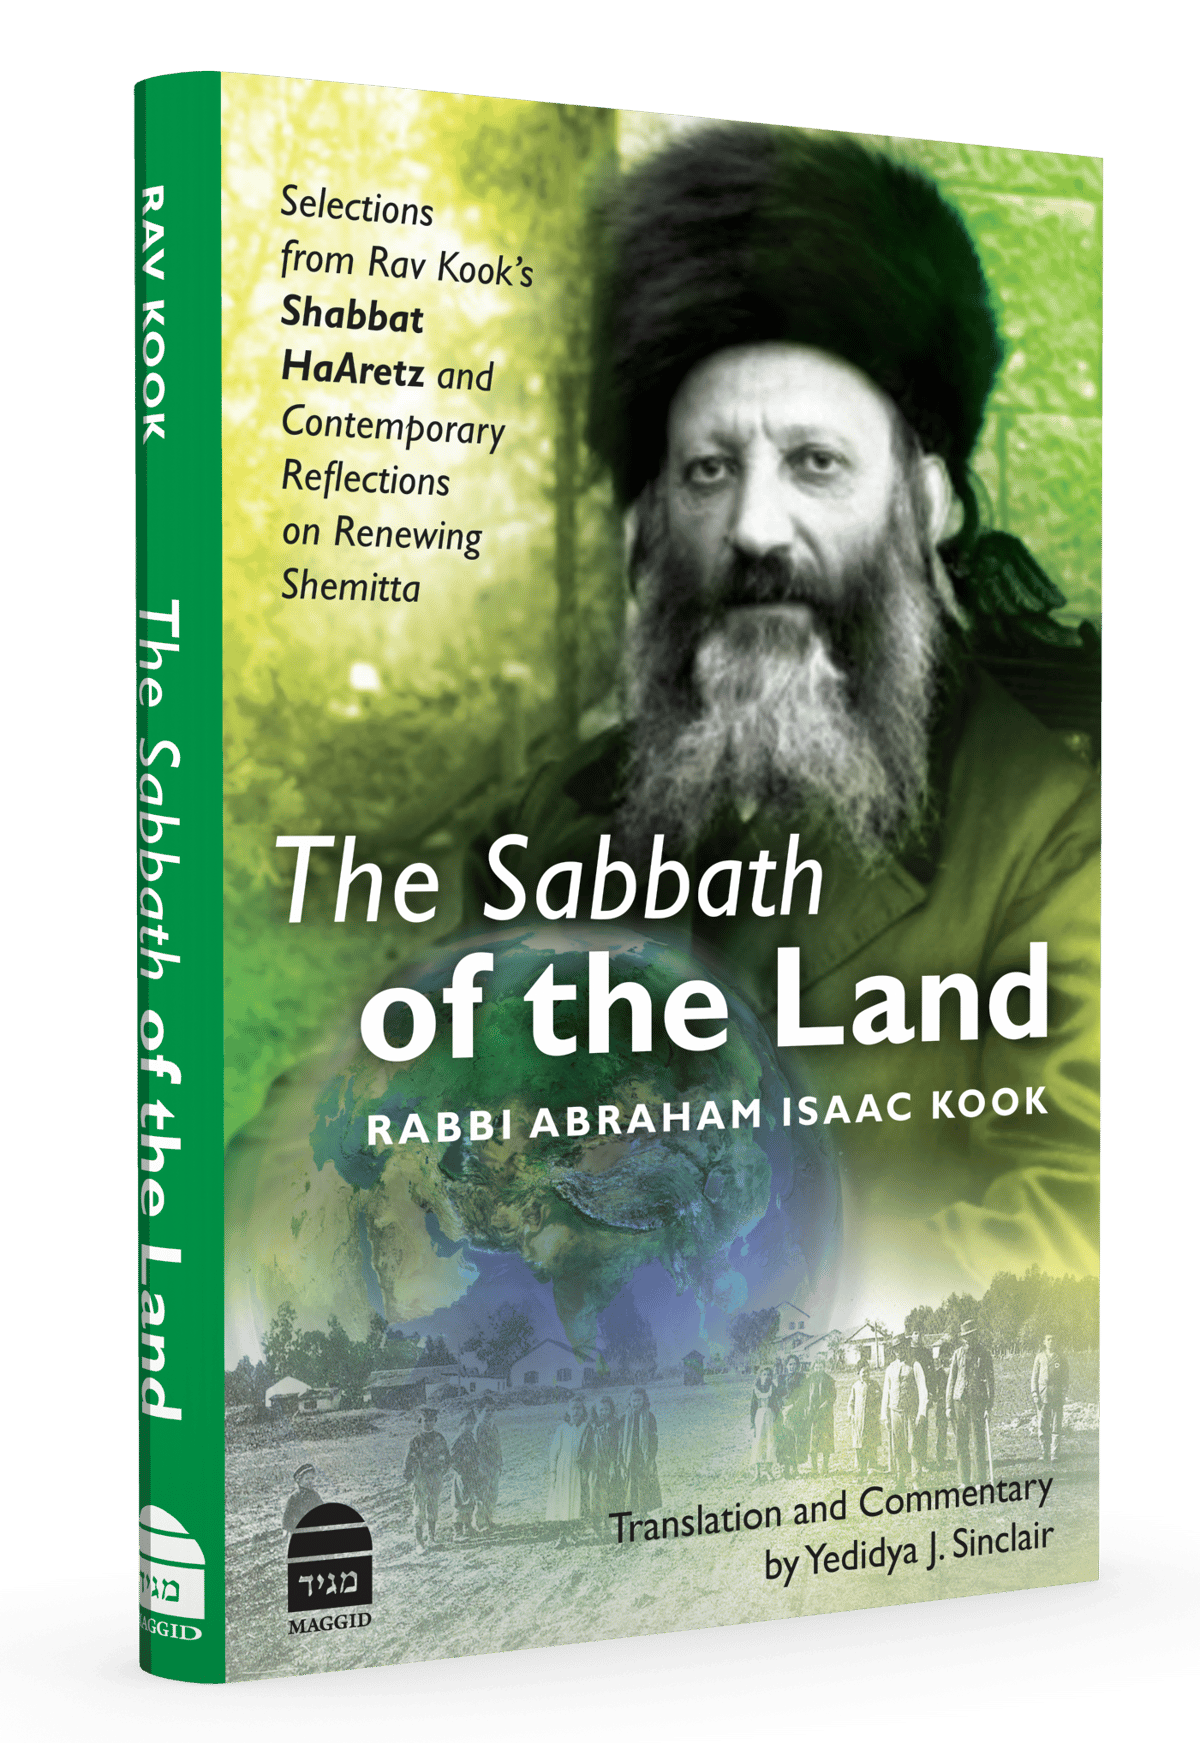 Image of The Sabbath of the Land